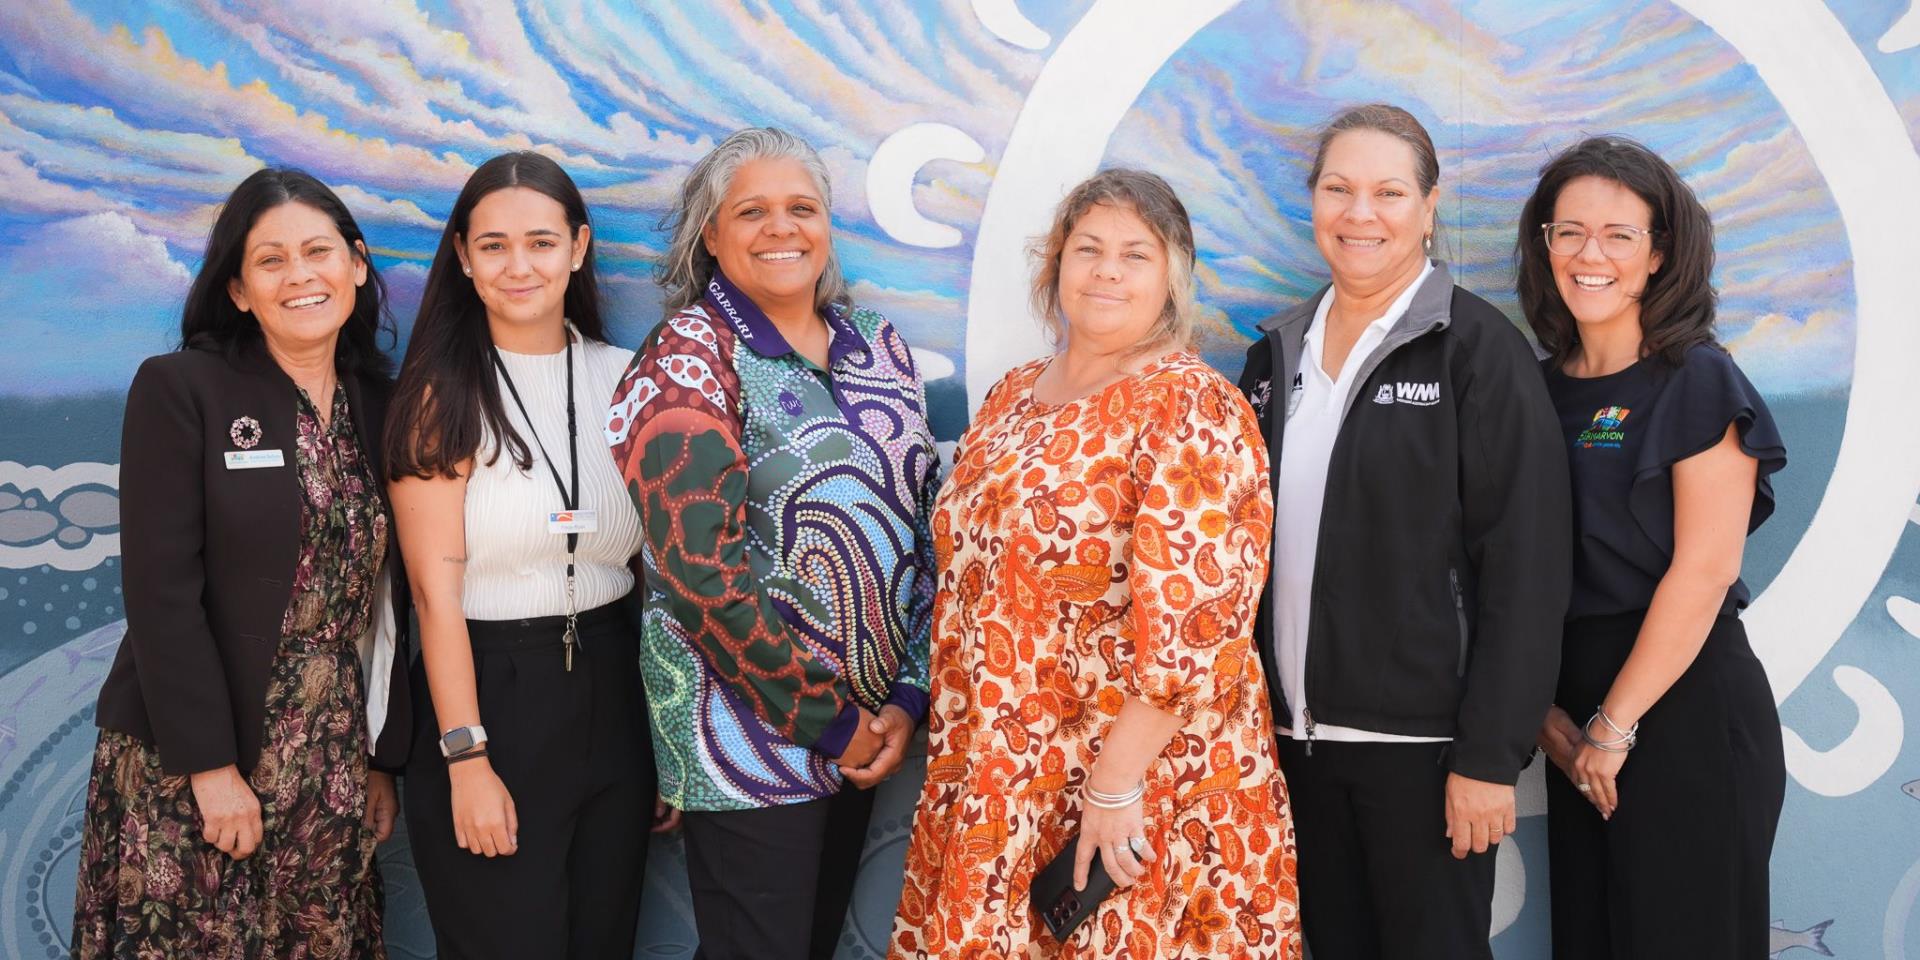 Shire of Carnarvon Reconciliation Action Plan Reference Group